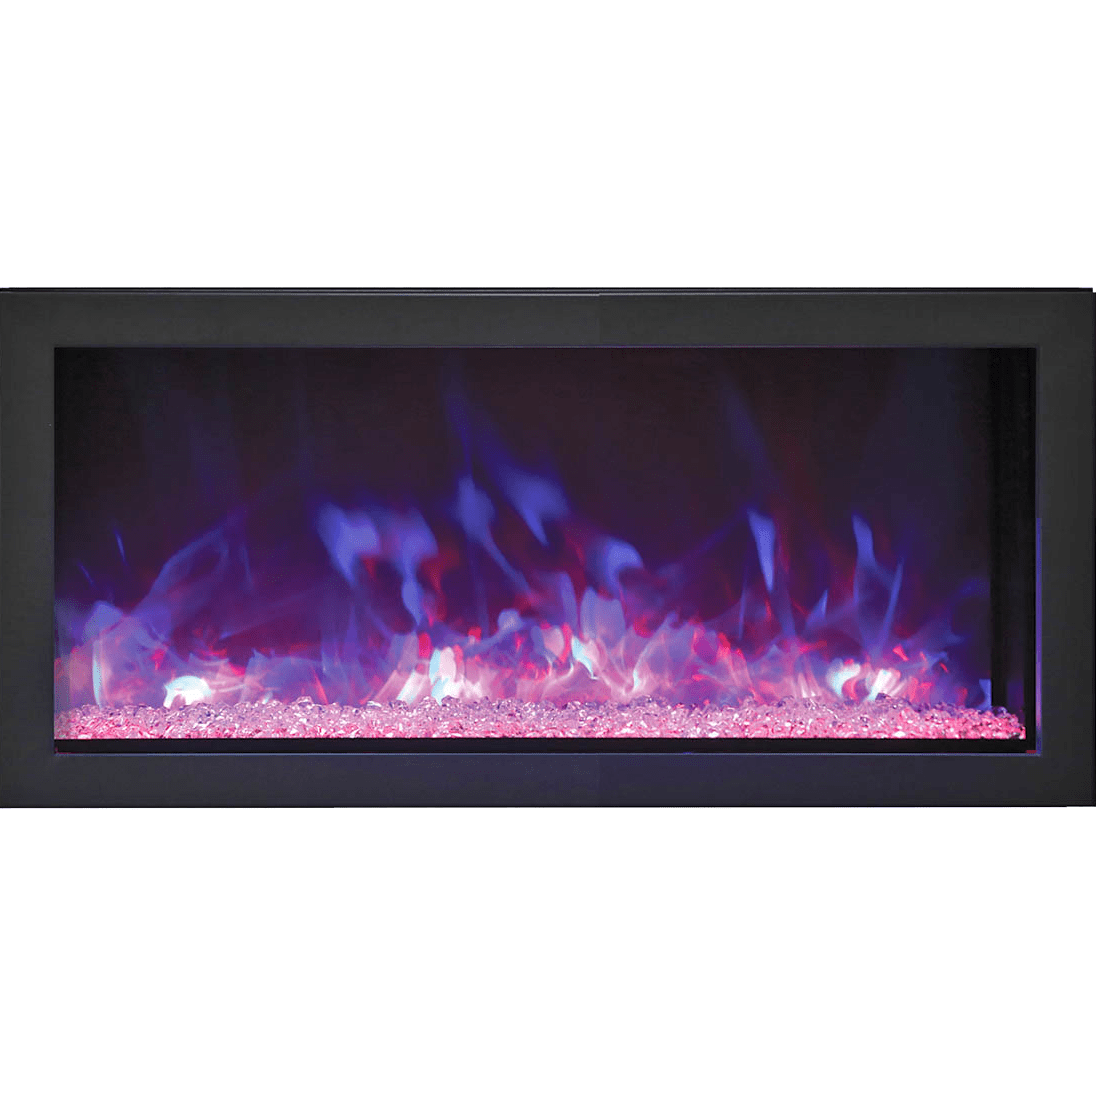 Remii Extra Slim Indoor/Outdoor Built-In Electric Fireplace - 35 Inch -  102735-XS